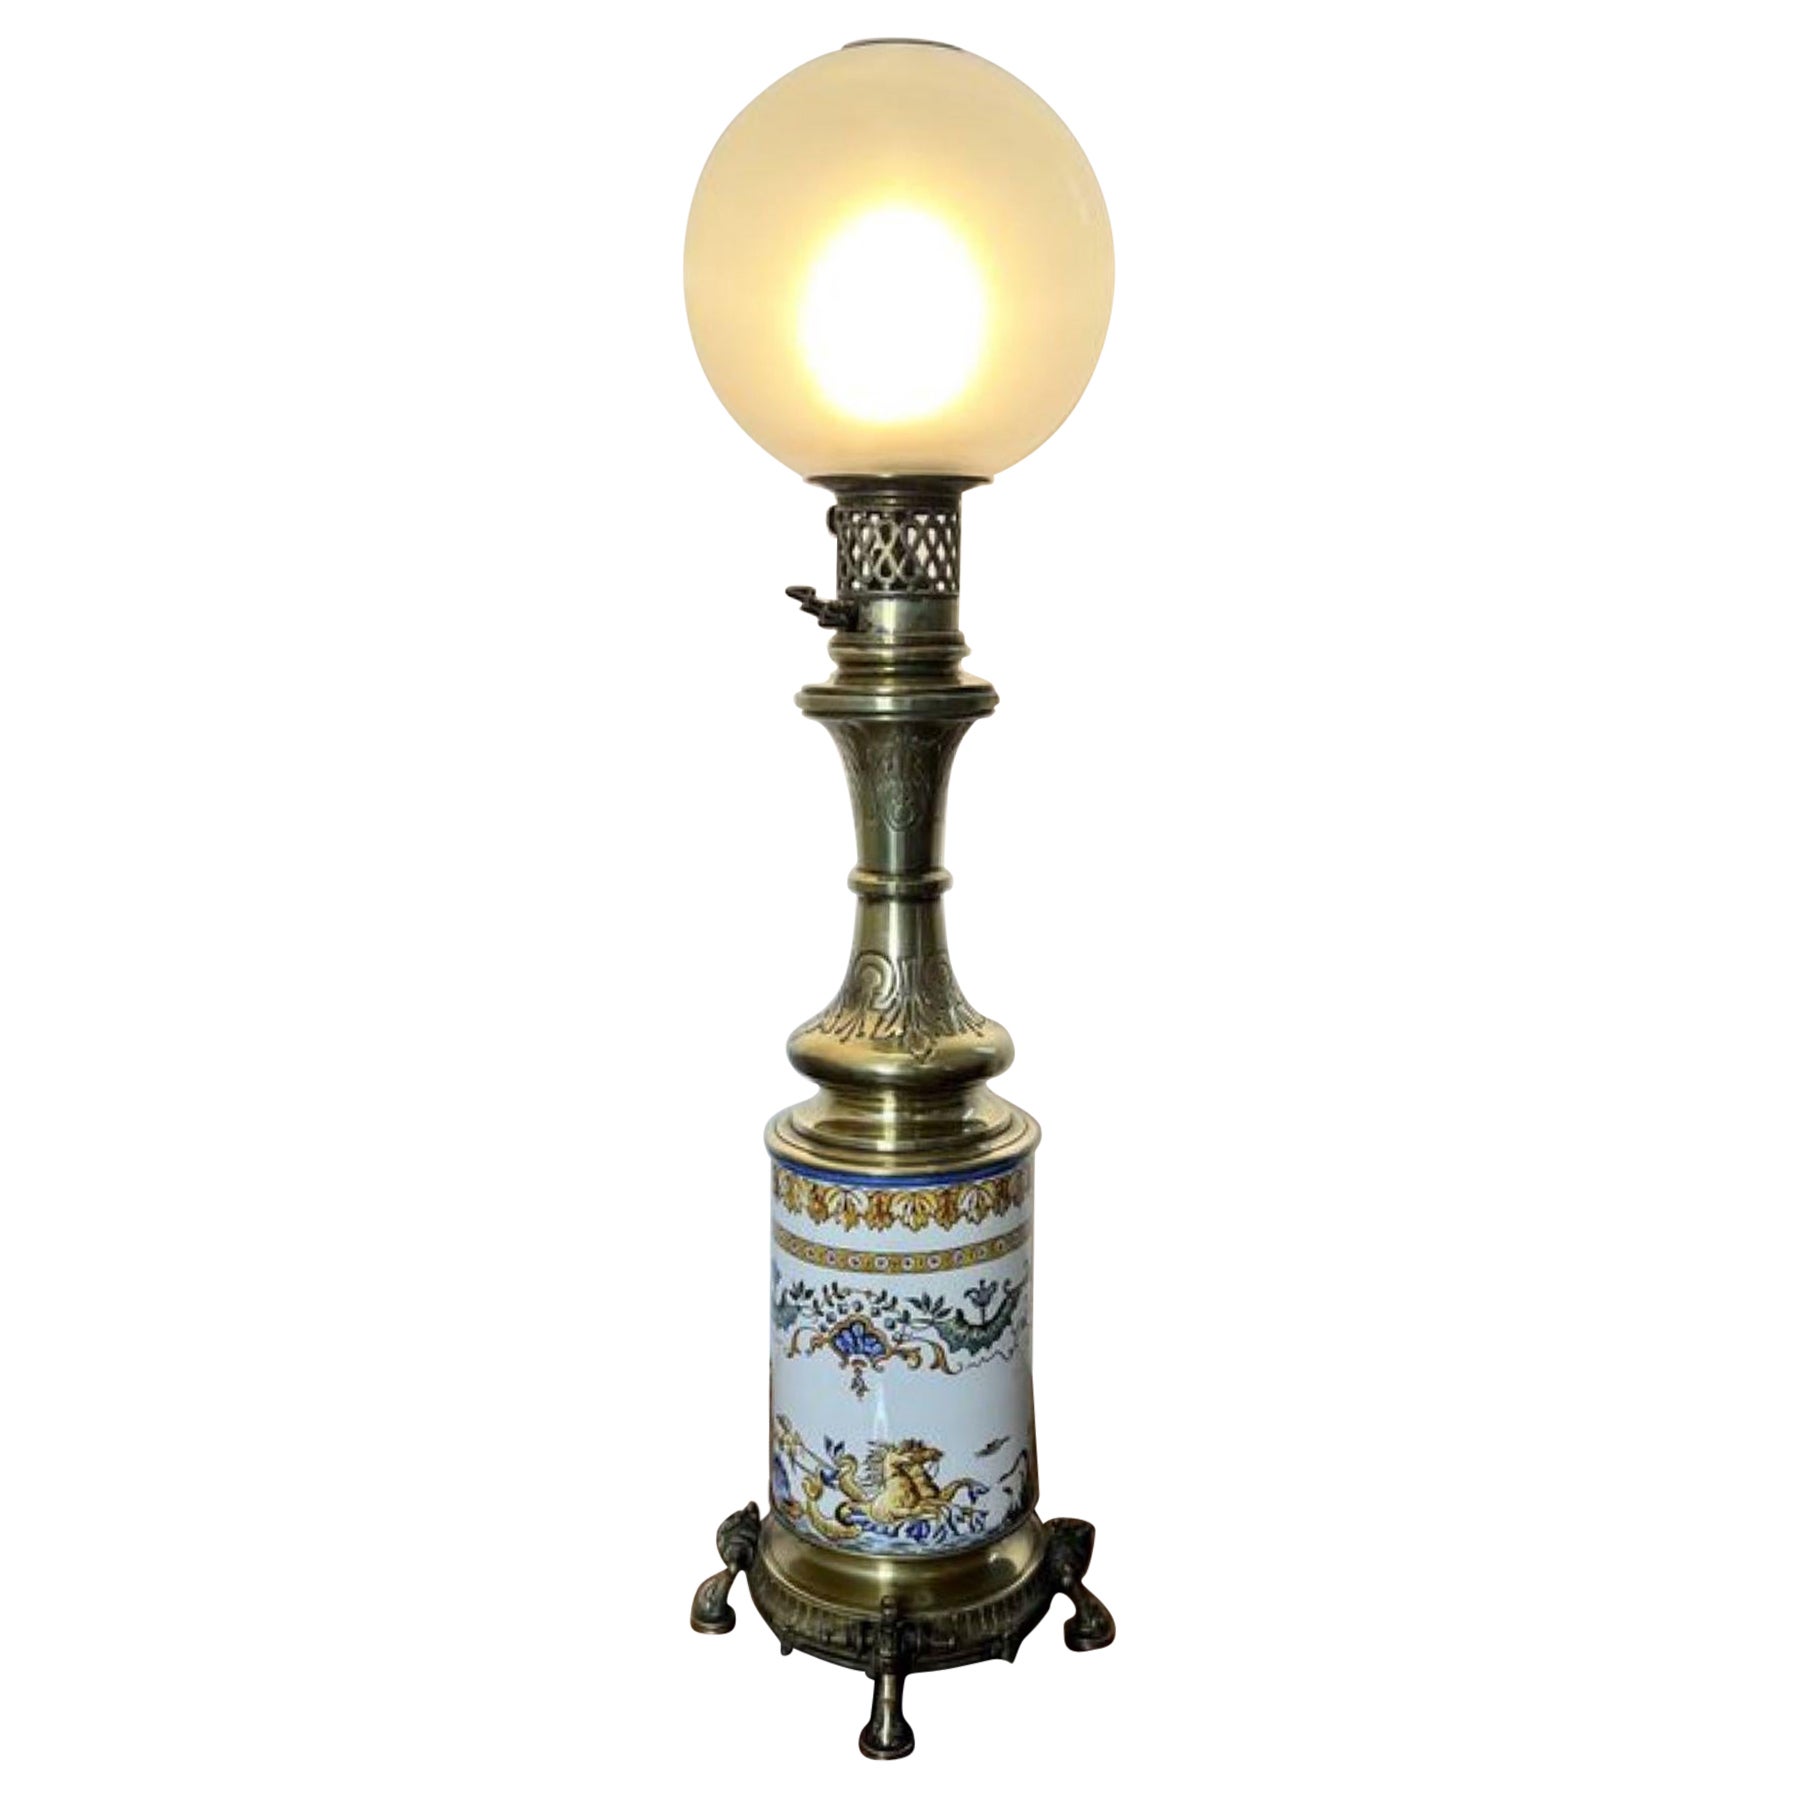 Quality antique Victorian ceramic and brass lamp For Sale